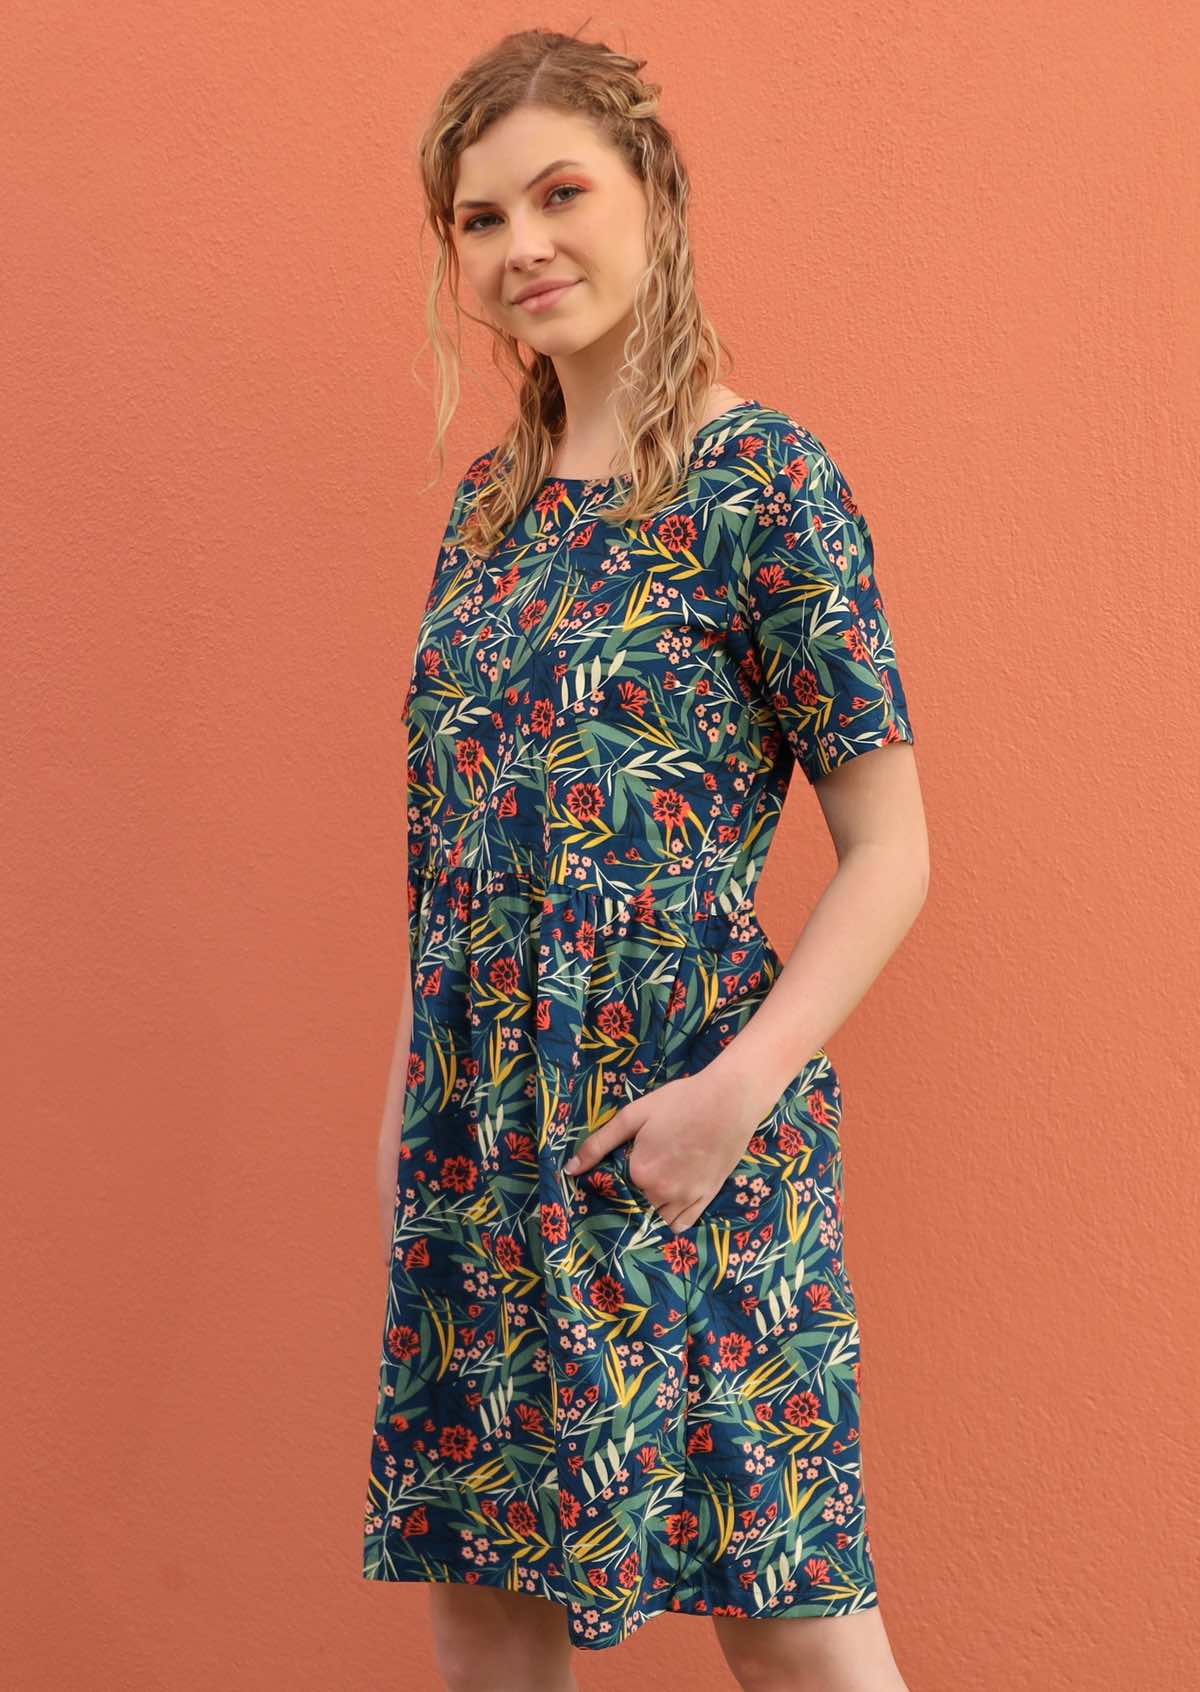 Model wears a 100% cotton dress that ends just above the knee. 